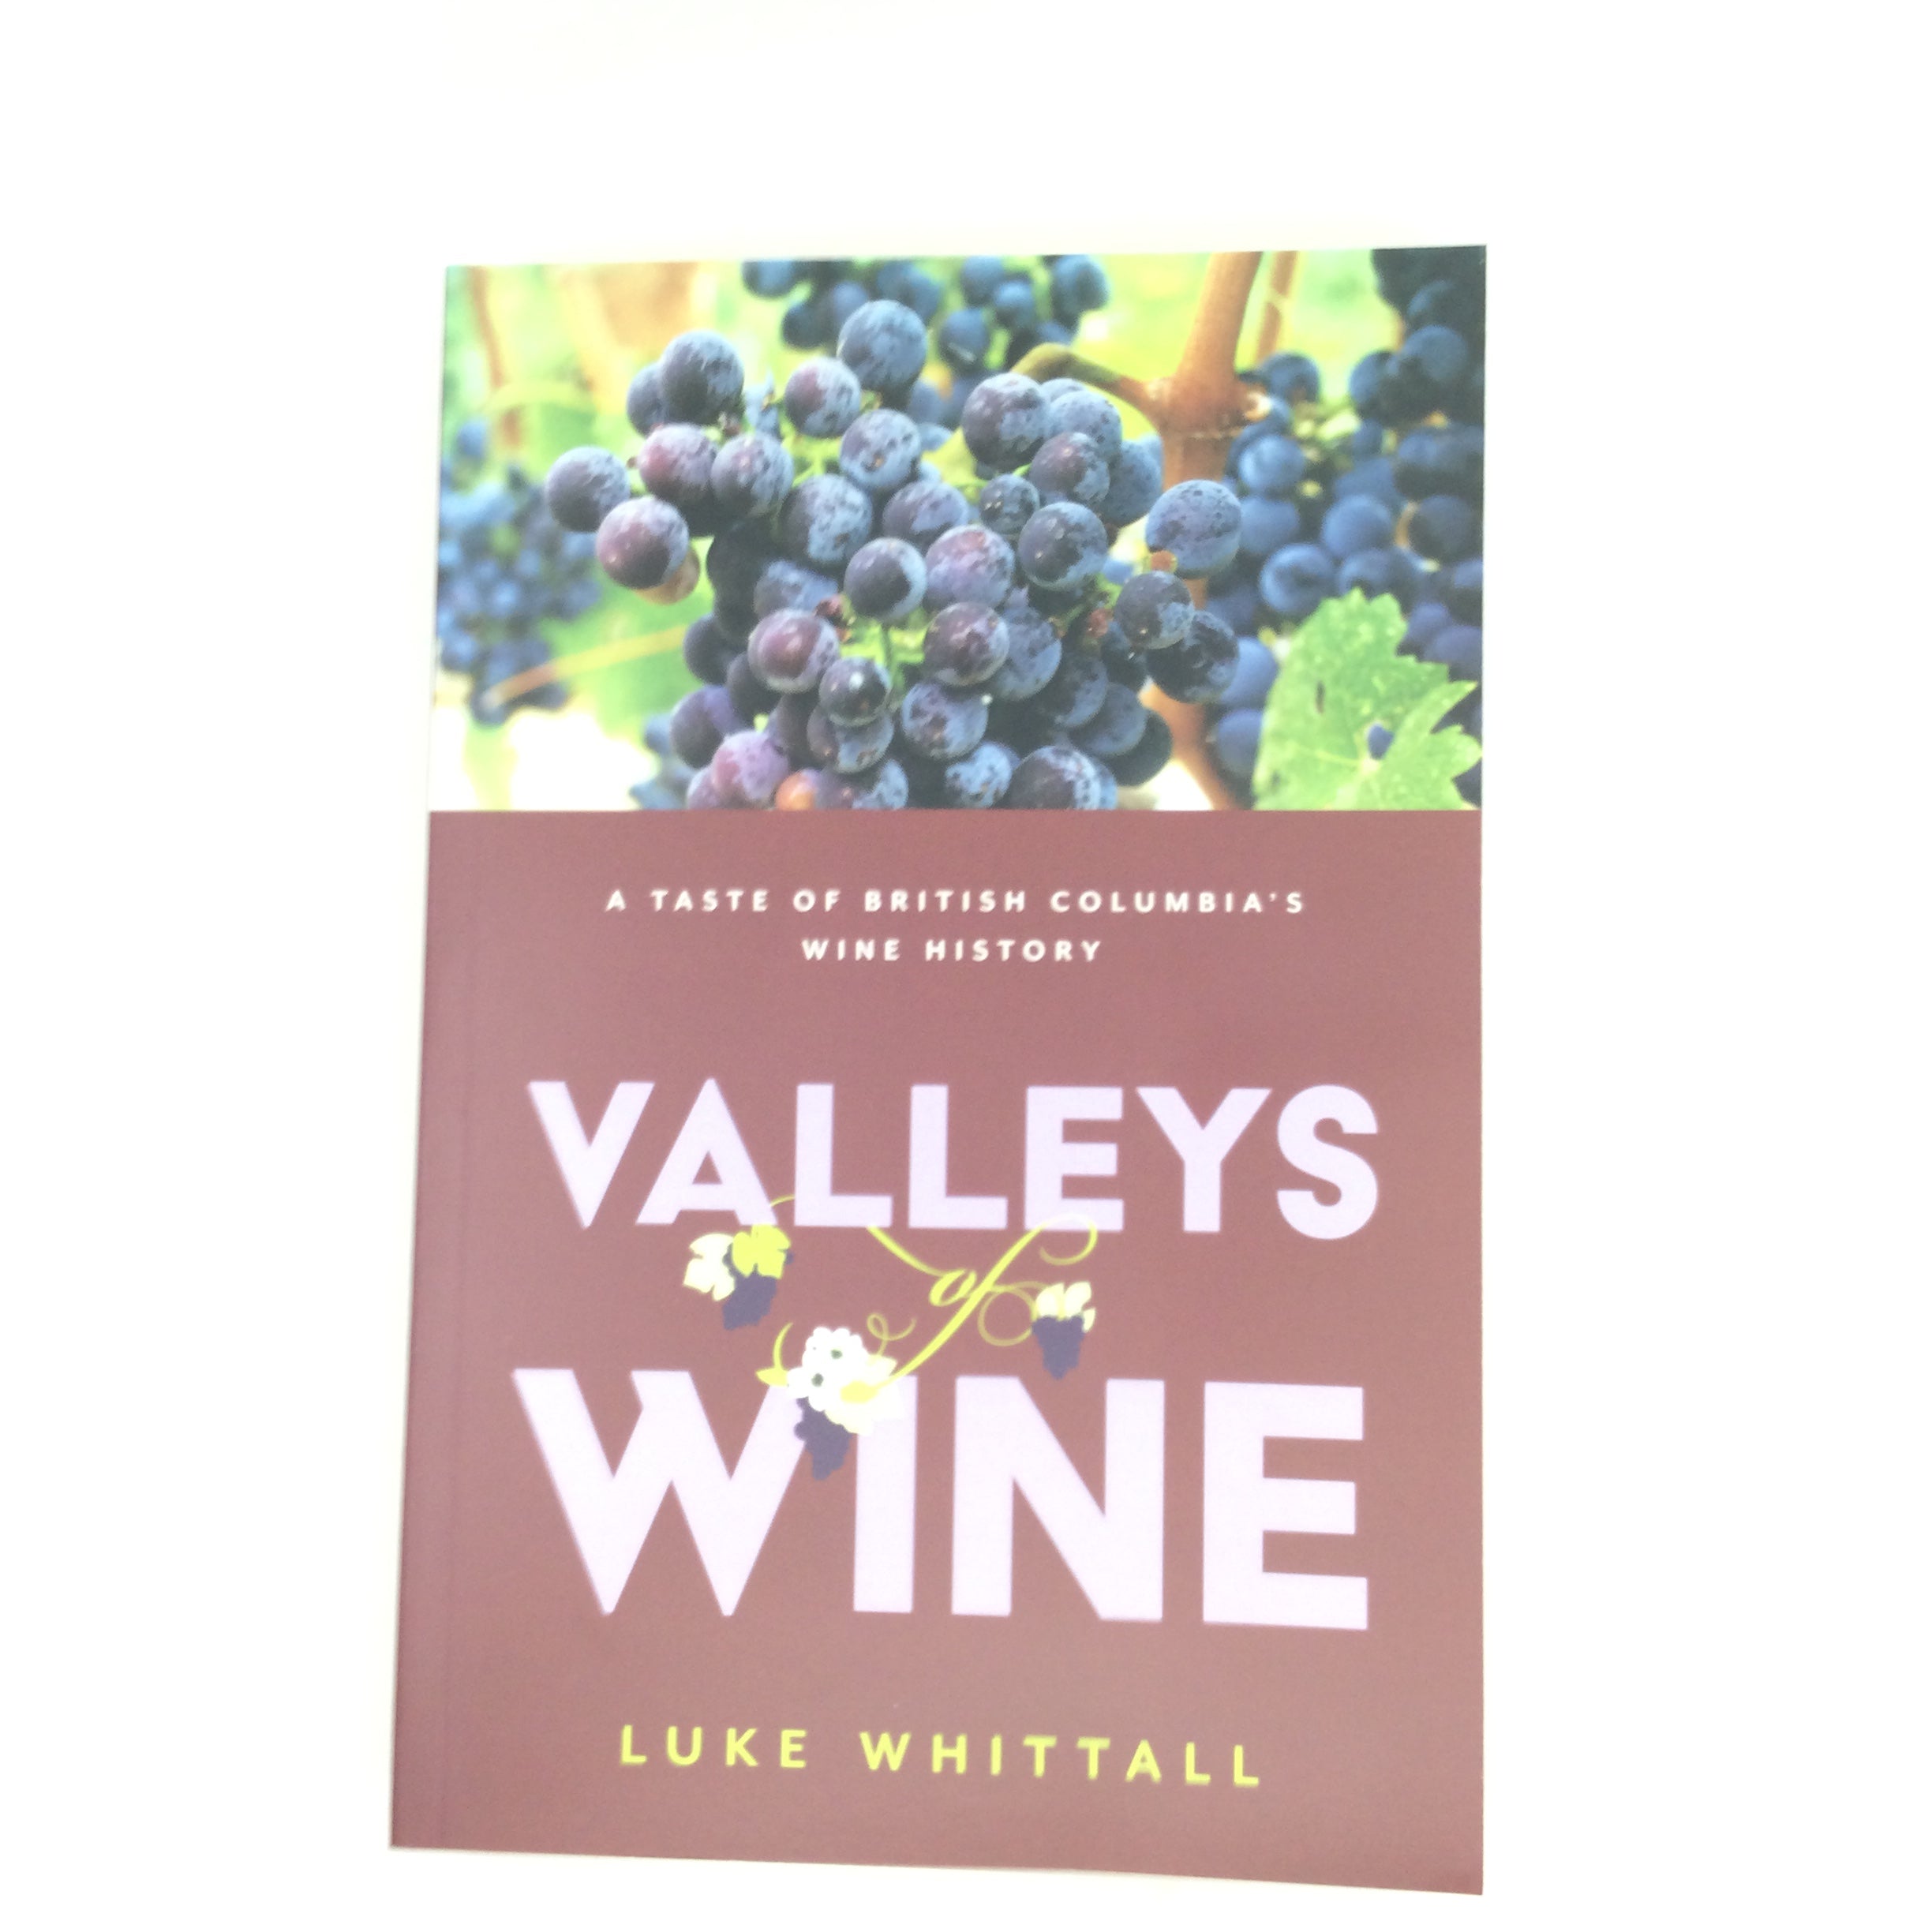 Valley of Wine by Luke Whittall